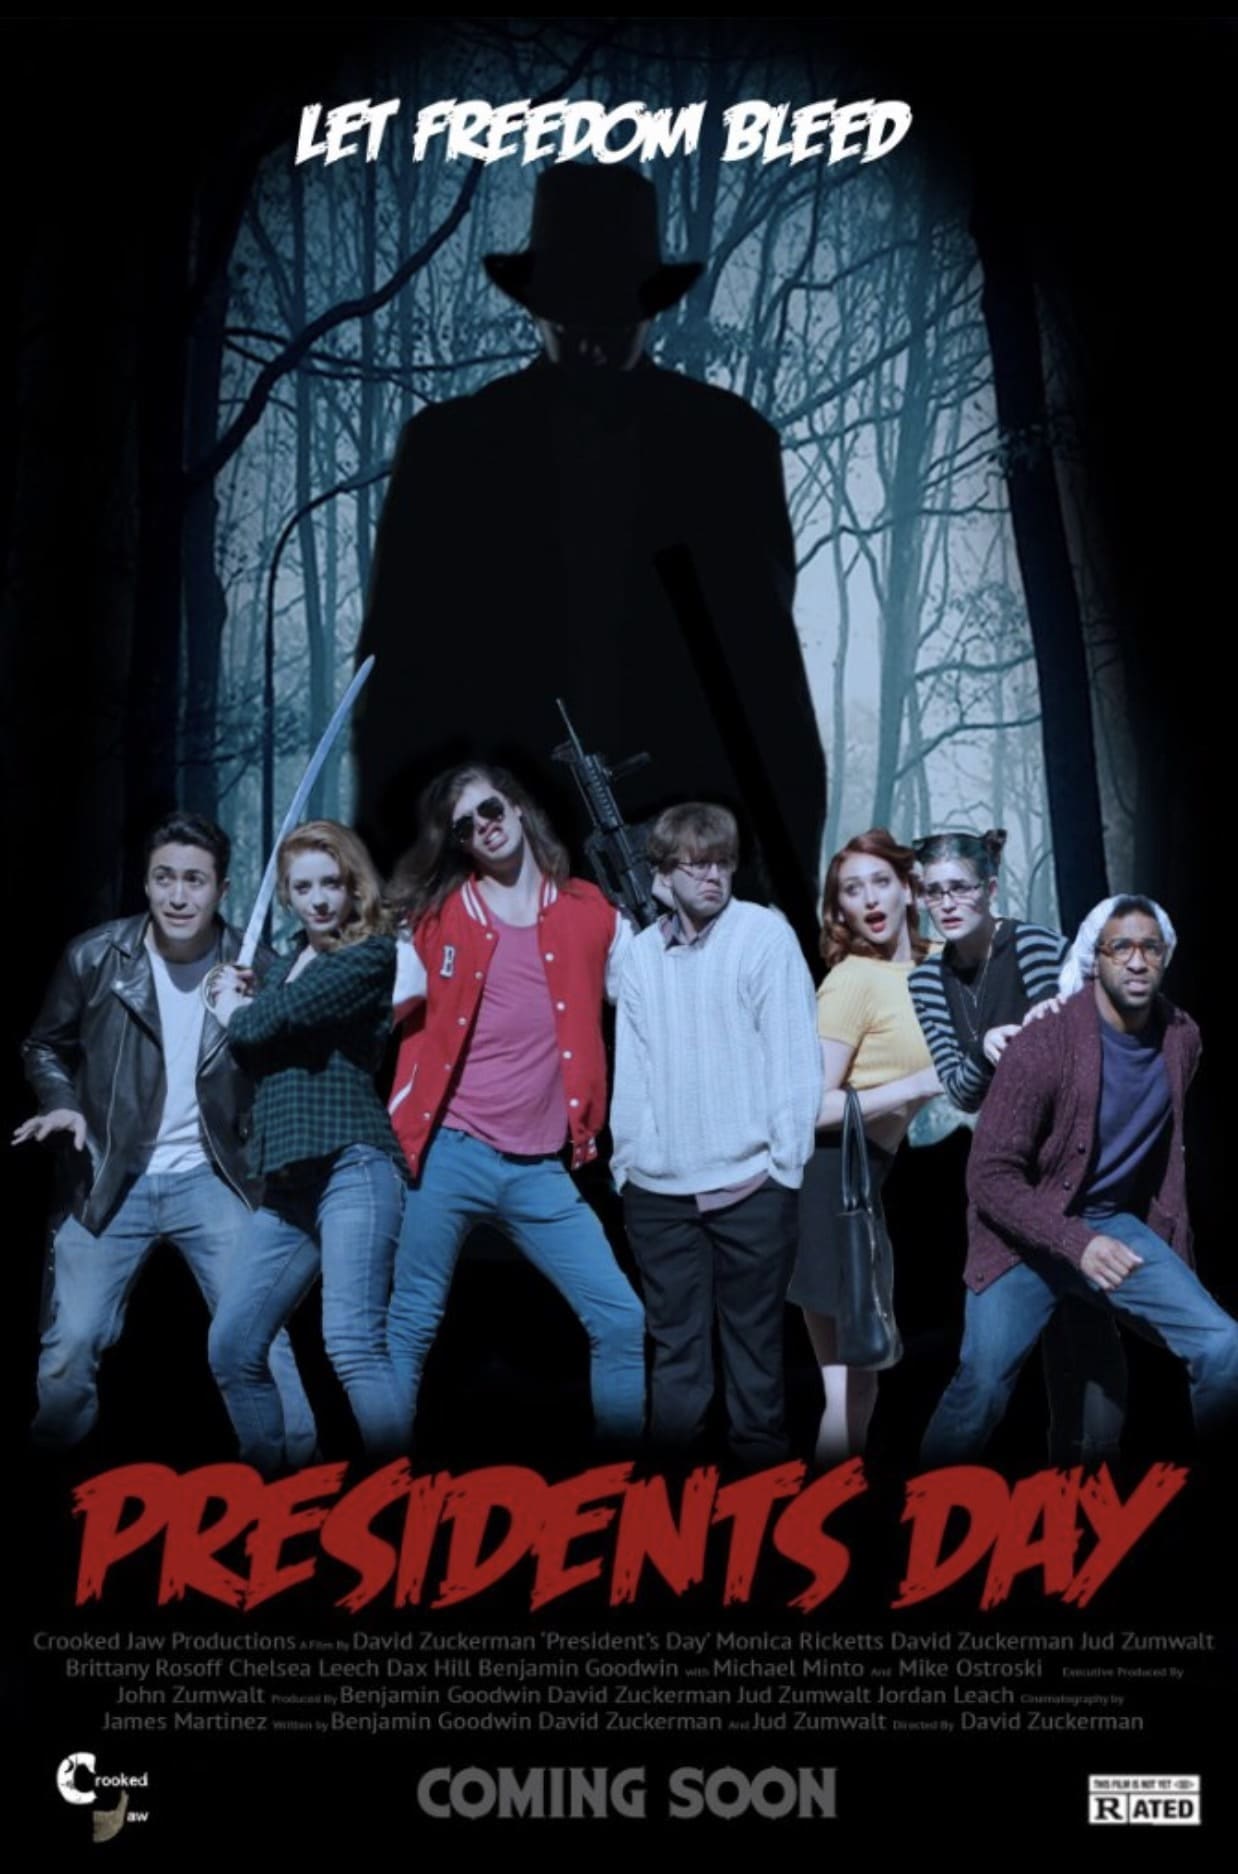 Poster for the movie "President's Day"